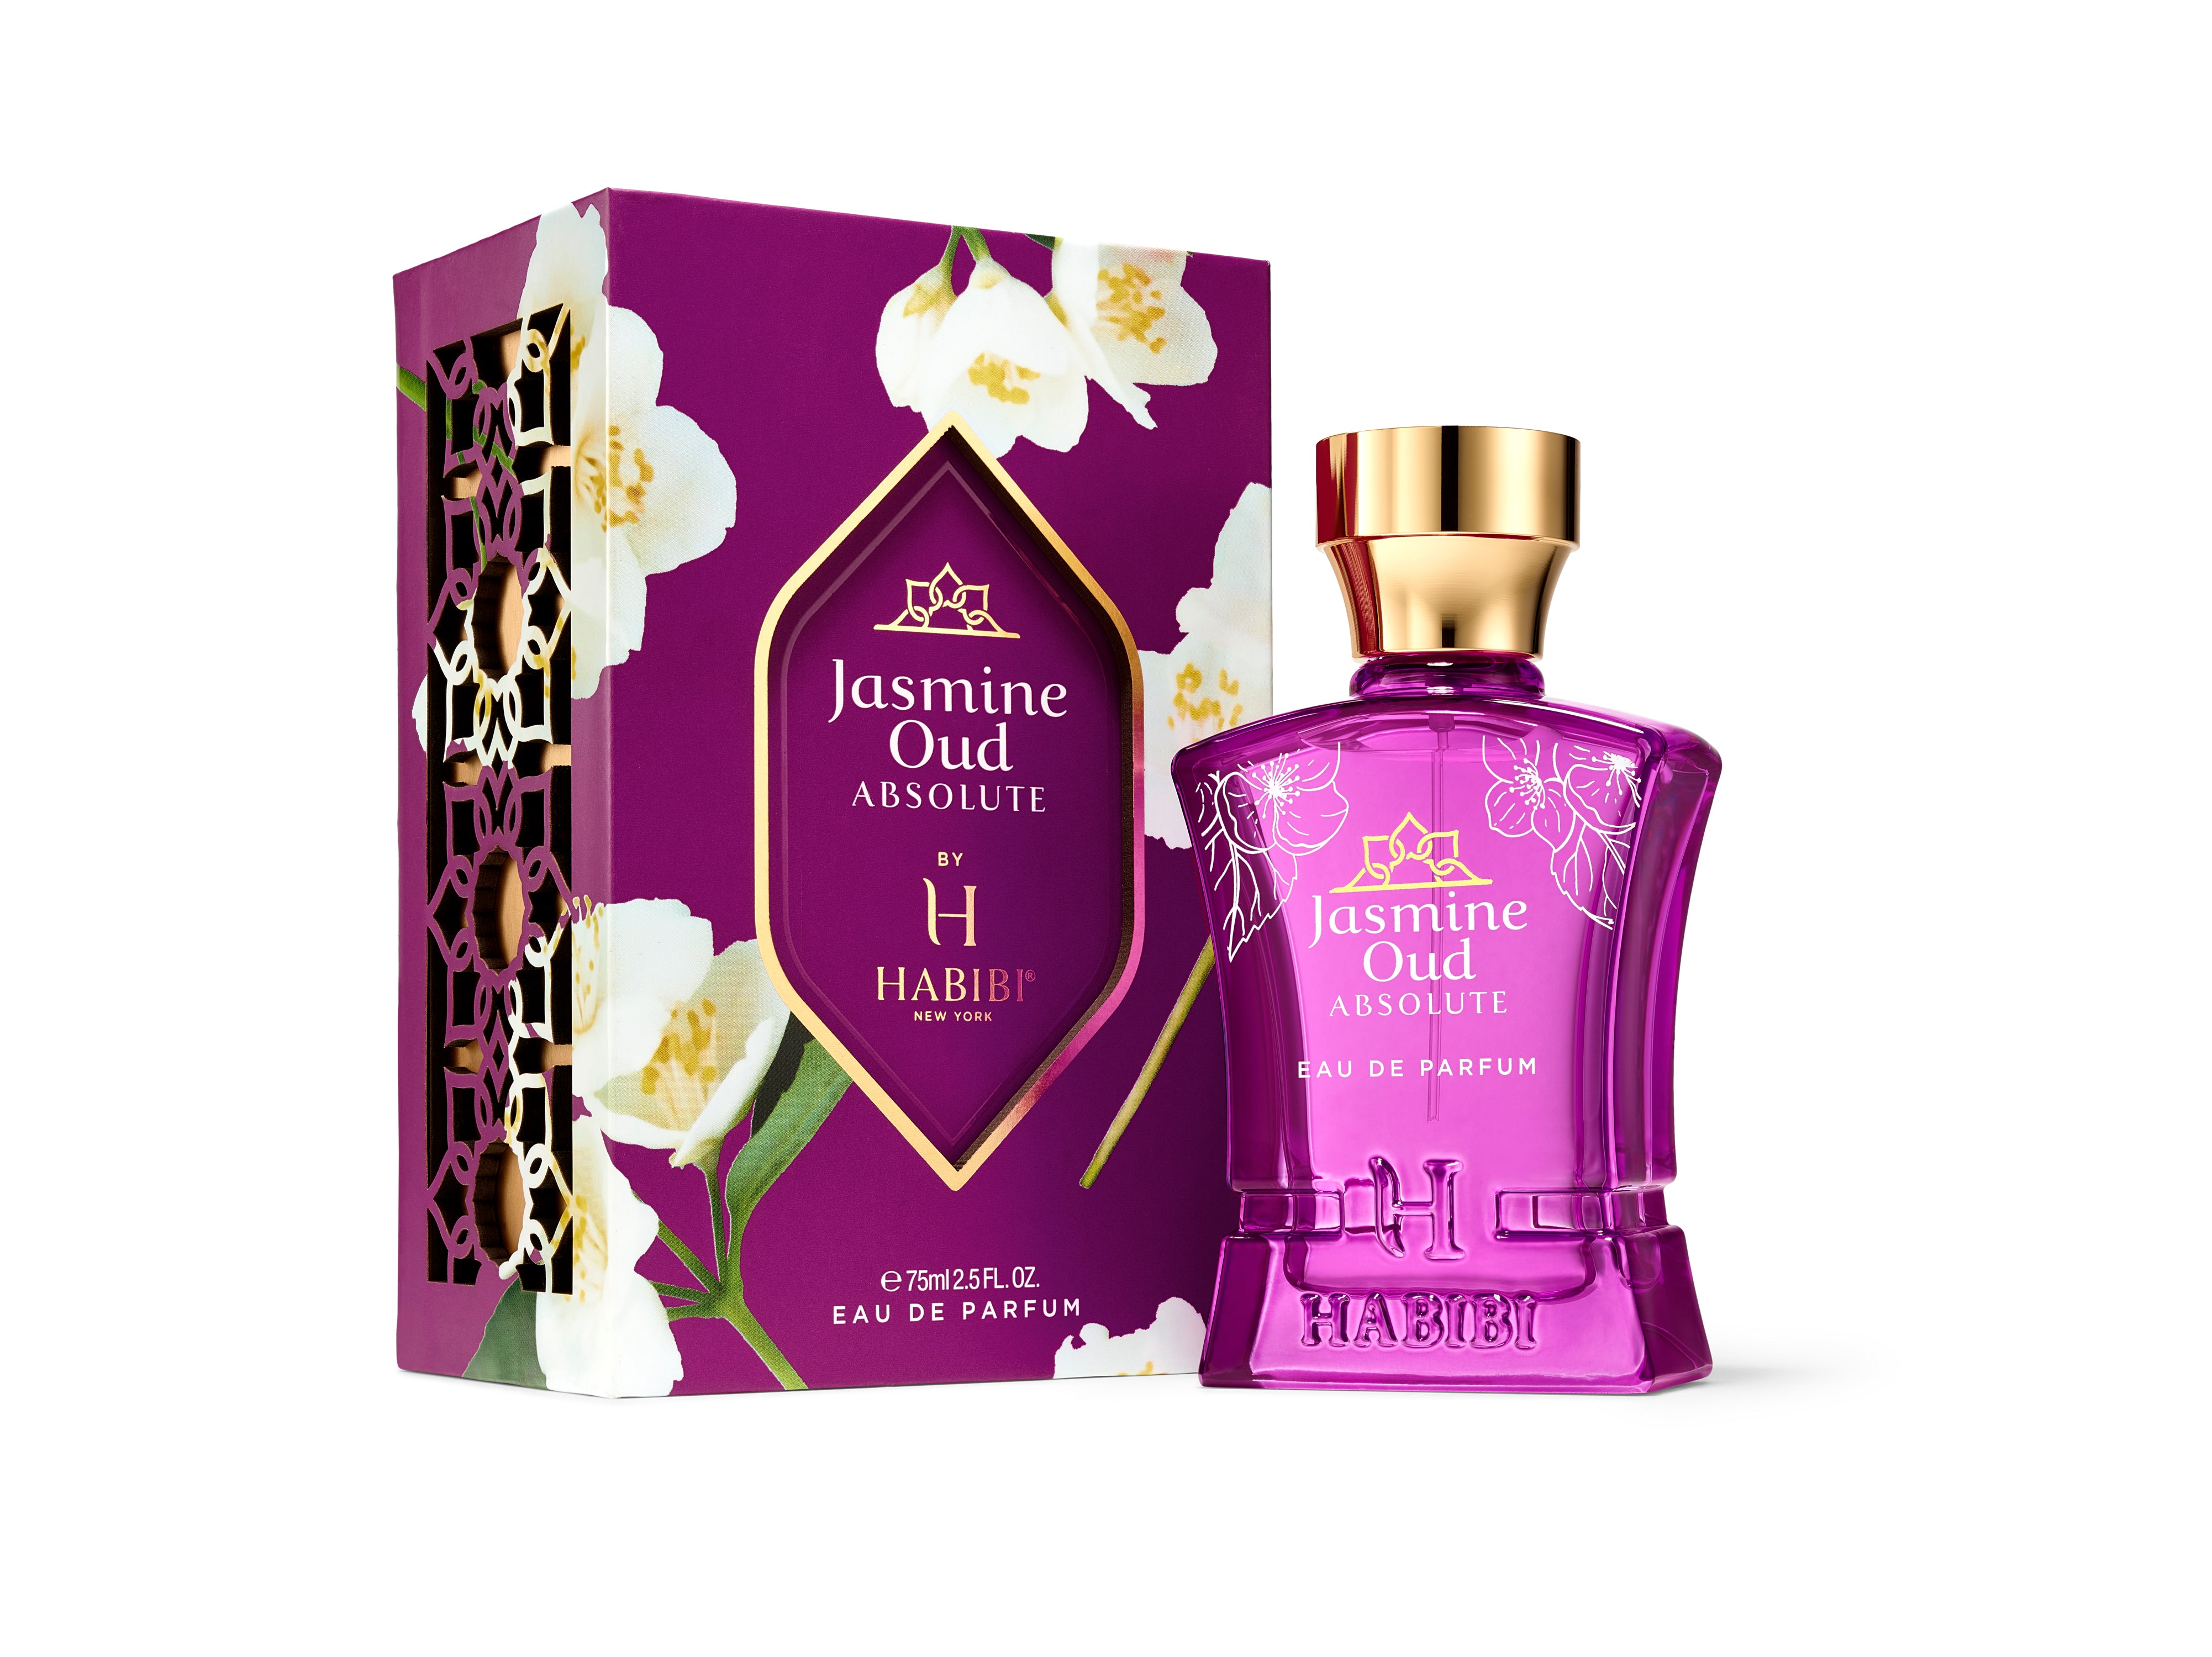 JASMINE OUD ABSOLUTE | FOR HER EDP 2.5 FL. OZ.